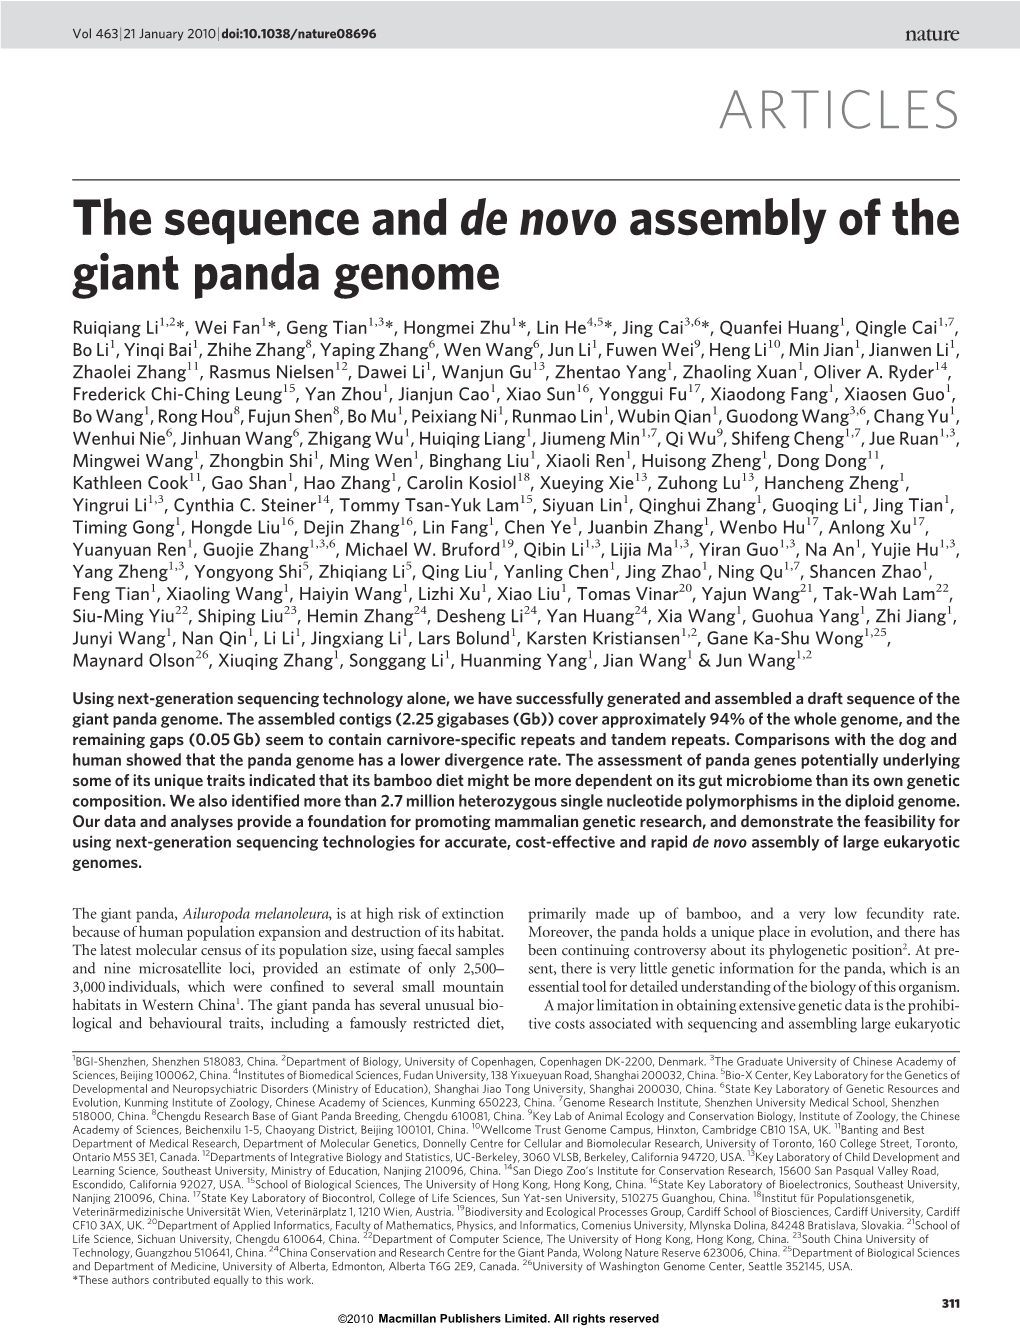 The Sequence and De Novo Assembly of the Giant Panda Genome